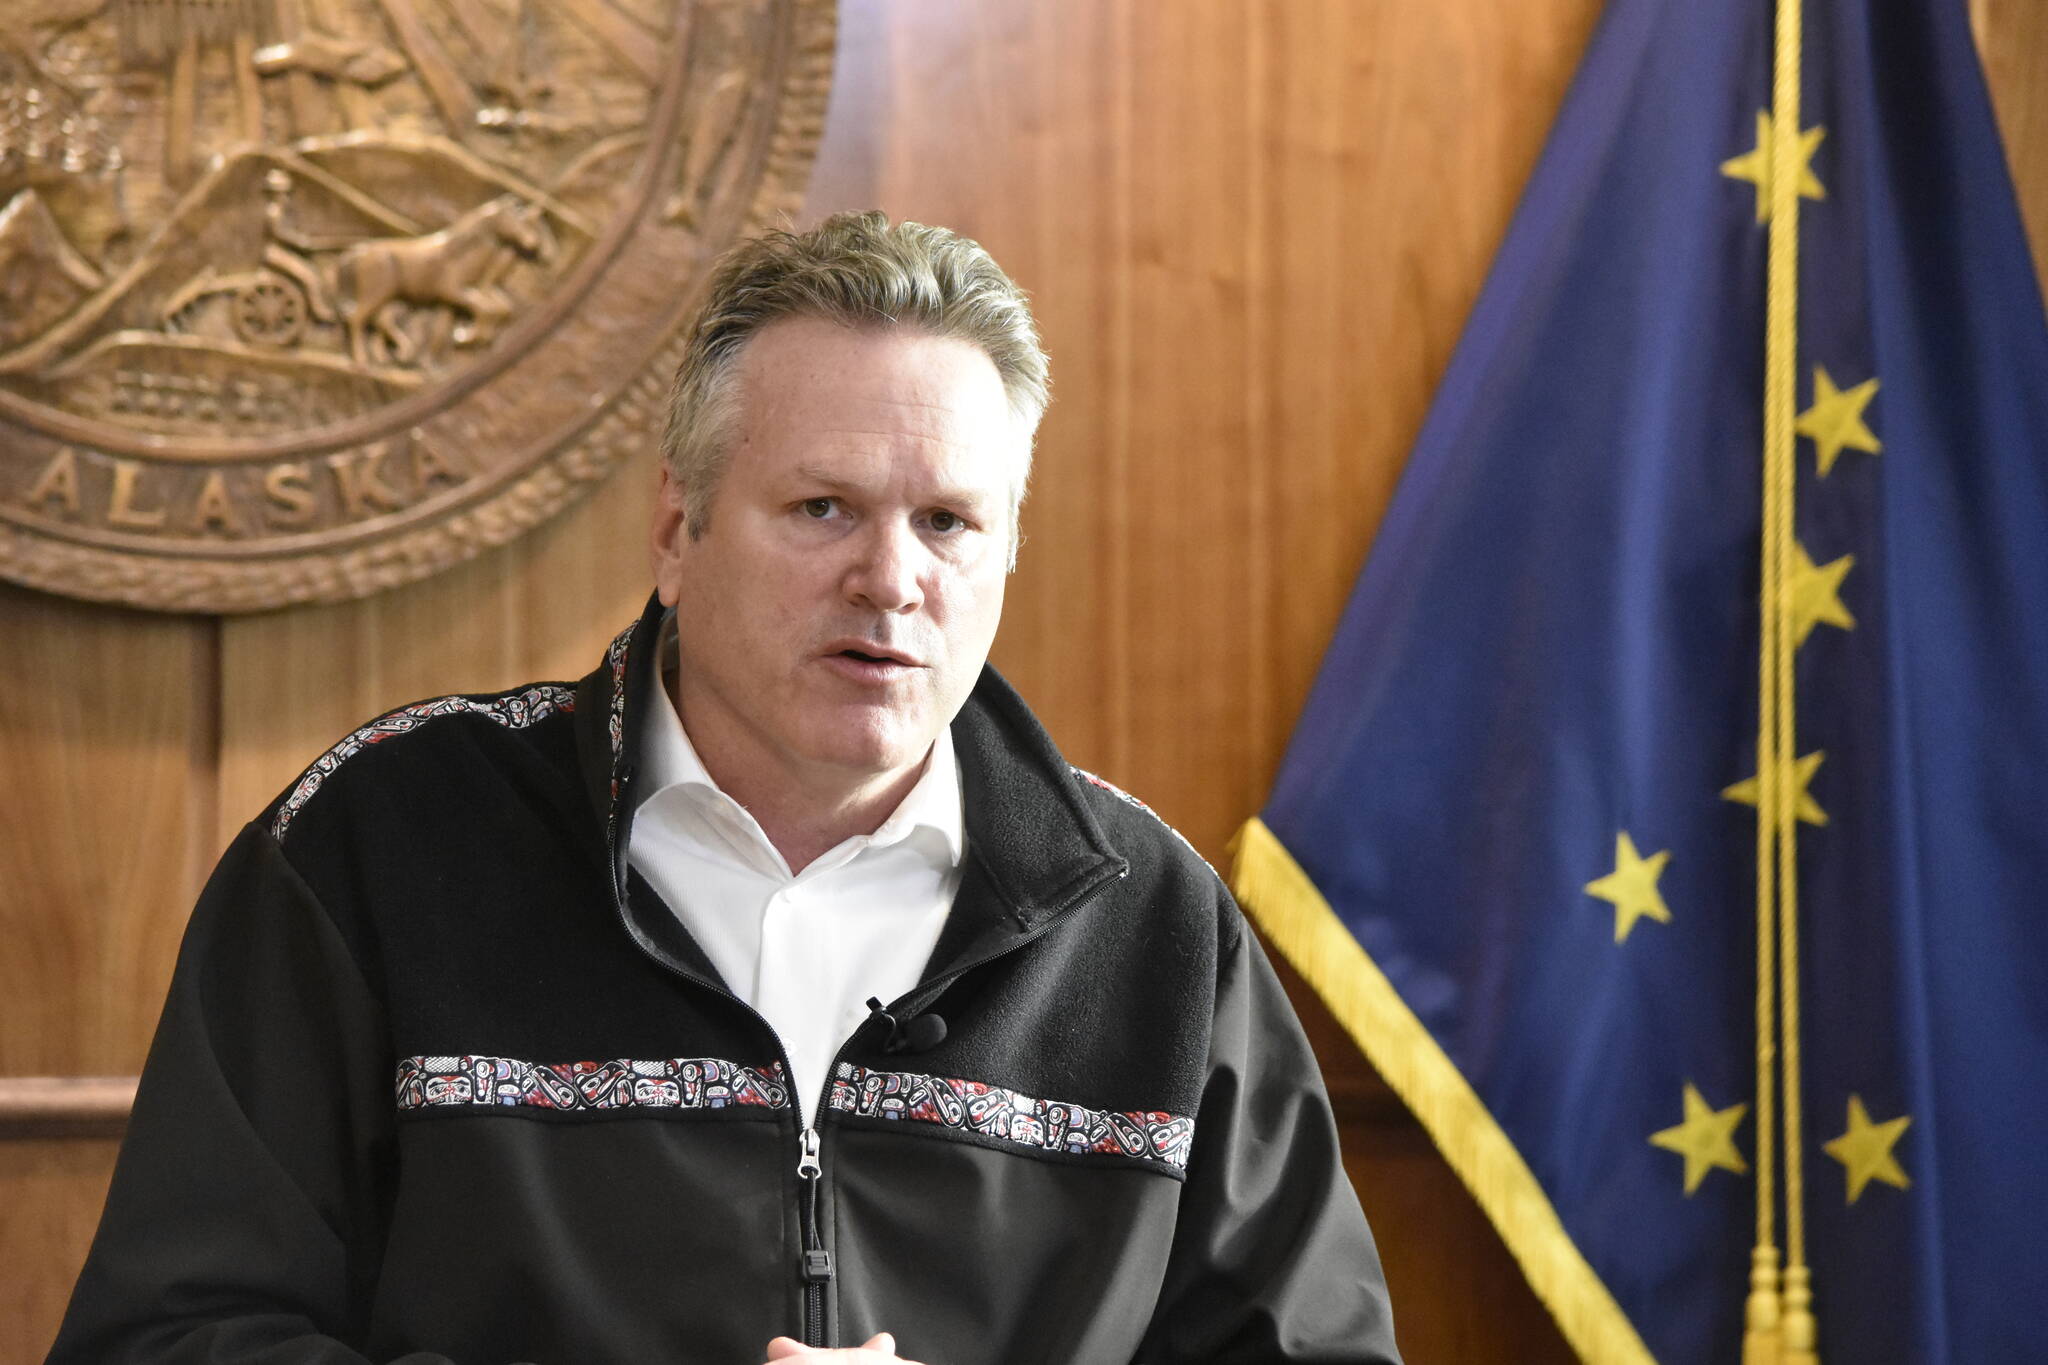 Gov. Mike Dunleavy criticized state lawmakers at a news conference at the Alaska State Capitol on Thursday, Oct. 28, 2022, for the lack of progress made during the fourth special session of the year. Dunleavy had called lawmakers to Juneau to work towards resolving the state's long term fiscal issues but deep divisions stalled work. (Peter Segall / Juneau Empire)